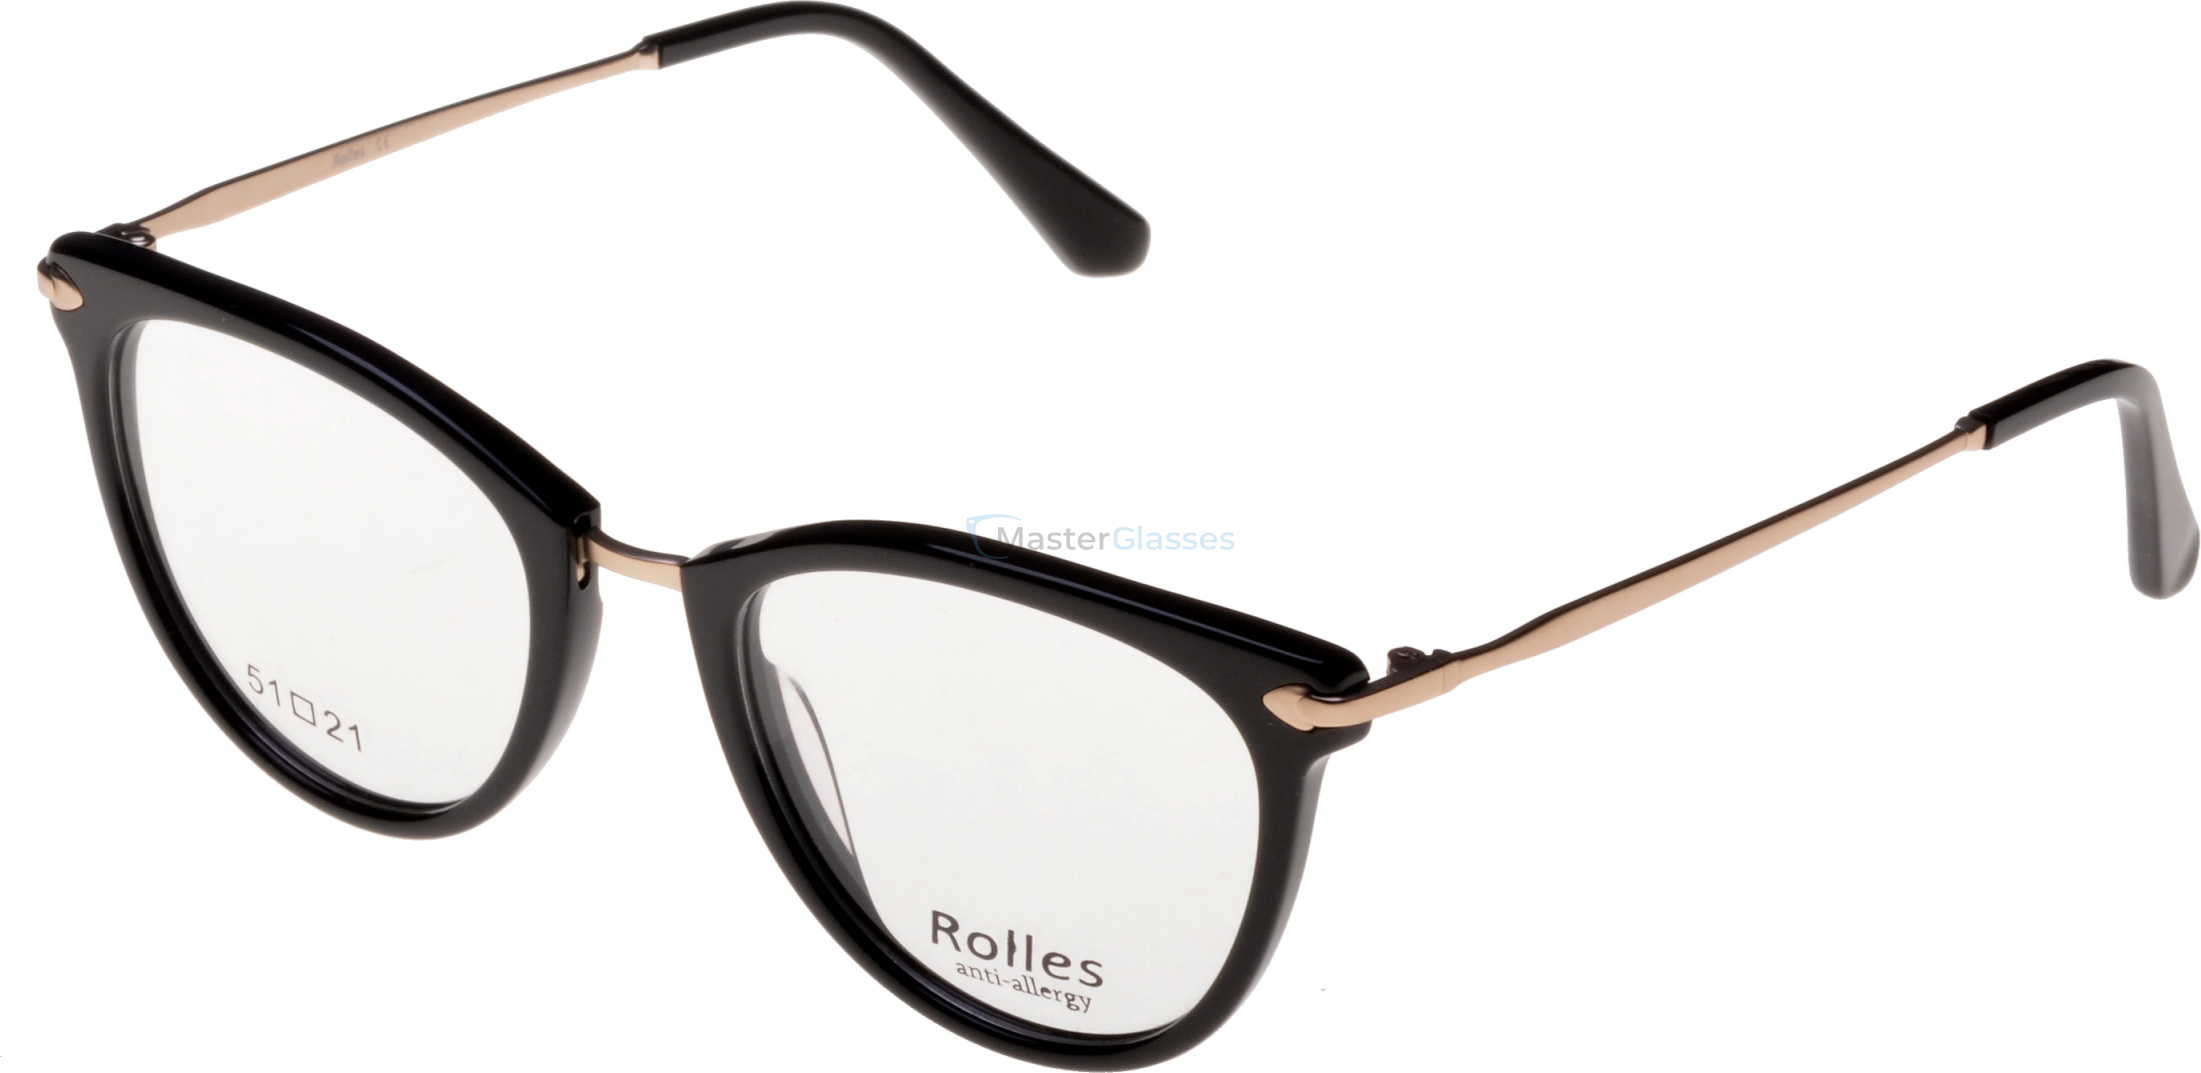  Rolles 512 01